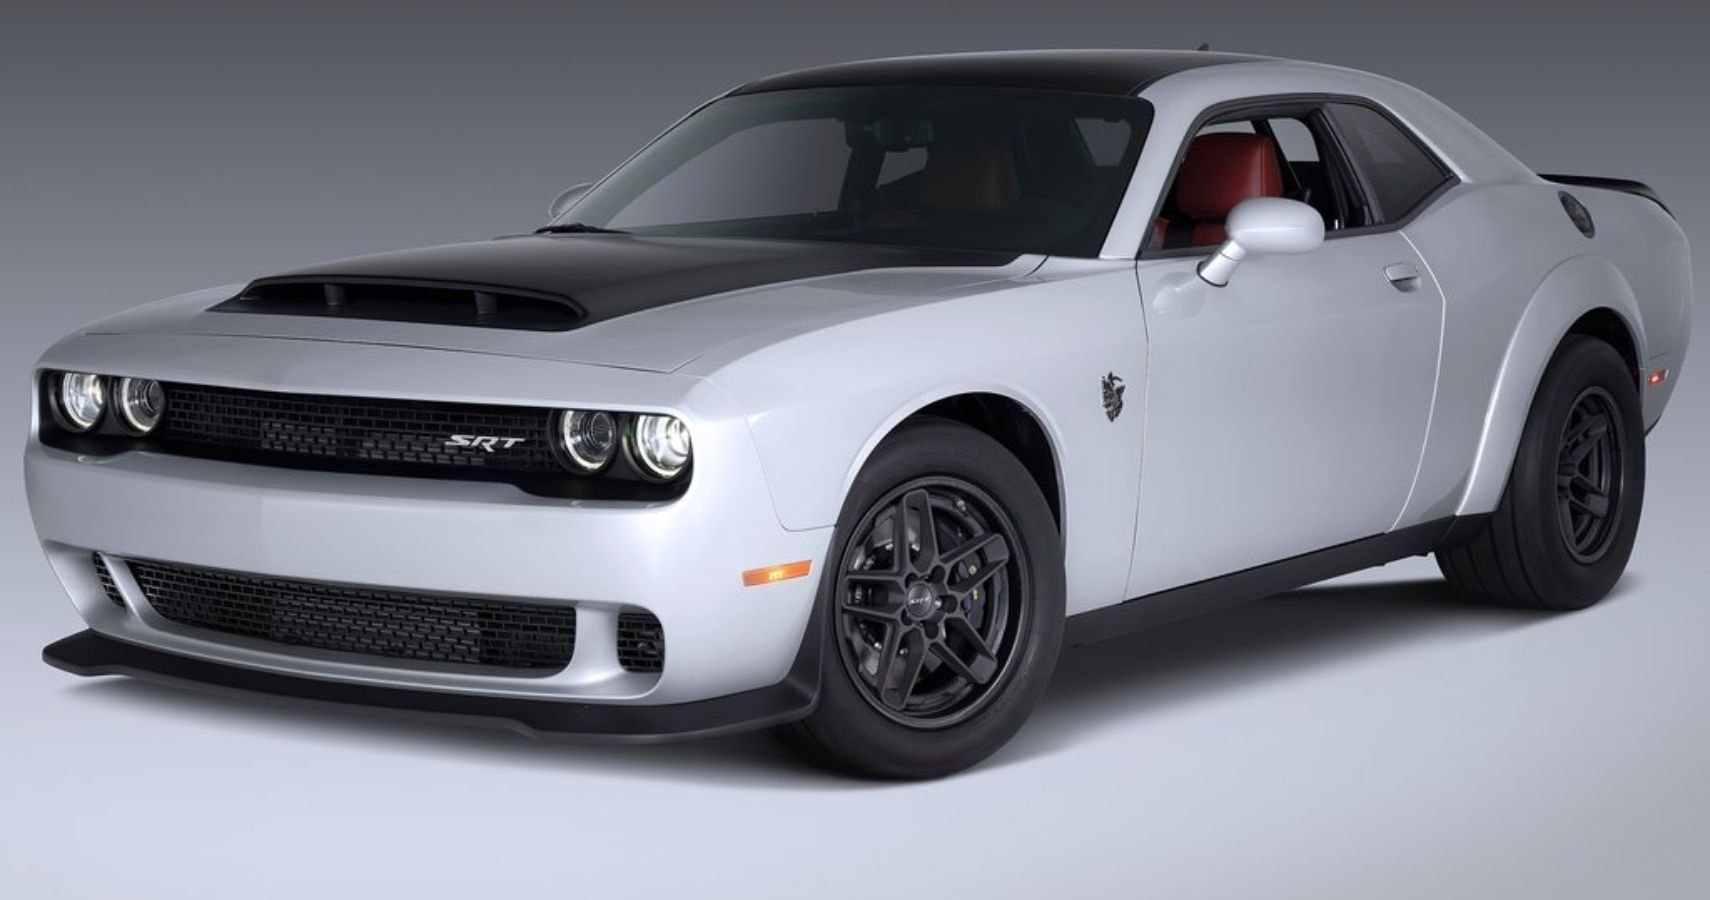 10-things-we-love-and-hate-about-the-2023-dodge-challenger-srt-demon-170